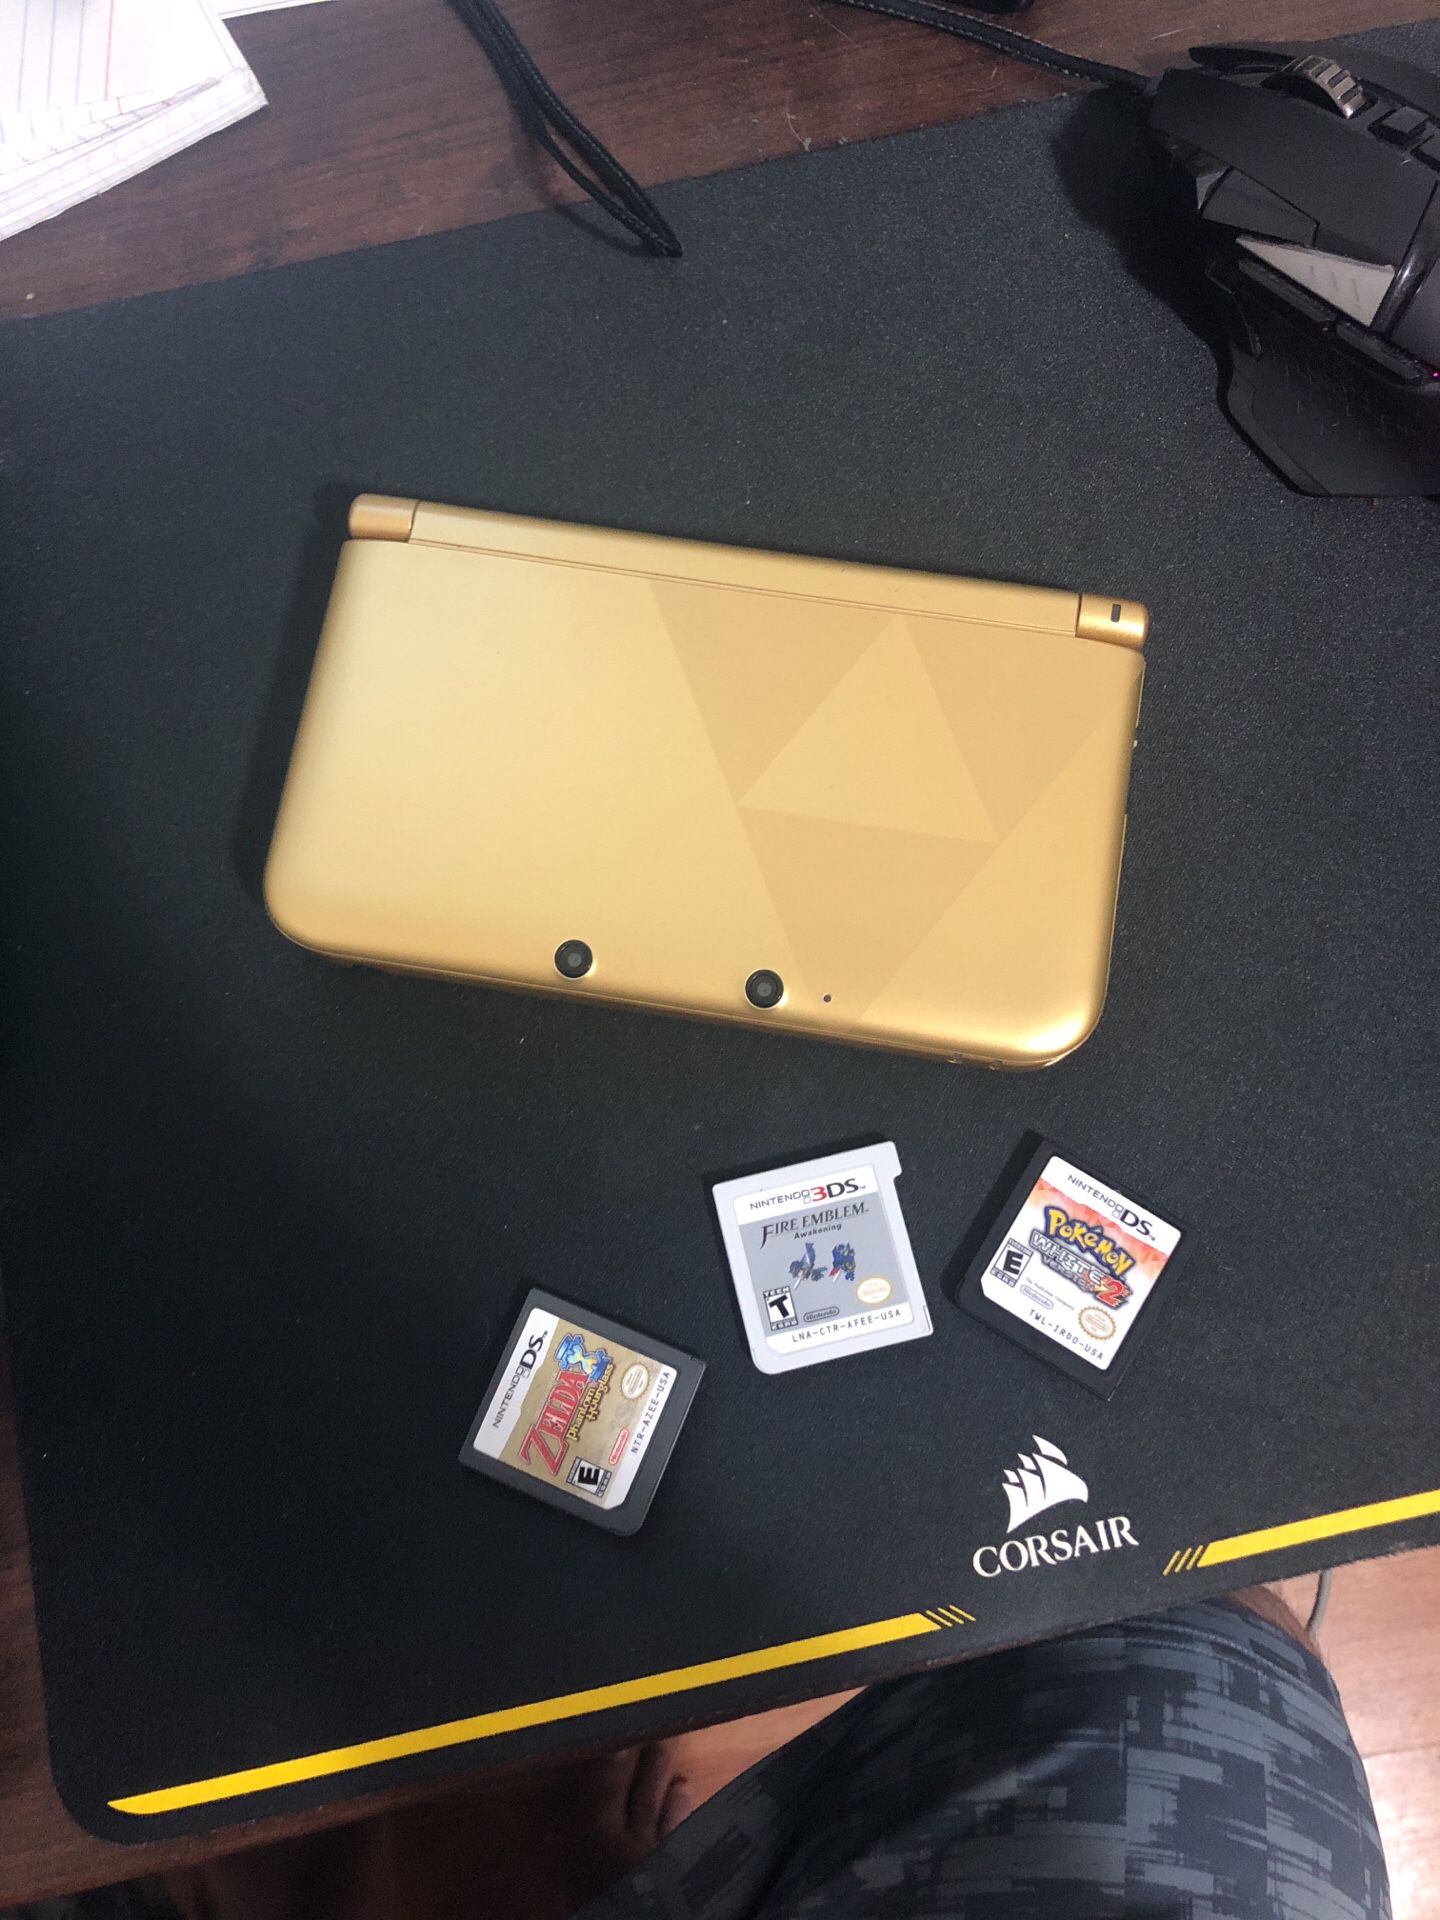 Nintendo 3DS XL legend of Zelda limited edition. Comes with 5 games! All for 130! Also includes 2 SD memory chips 4gb each